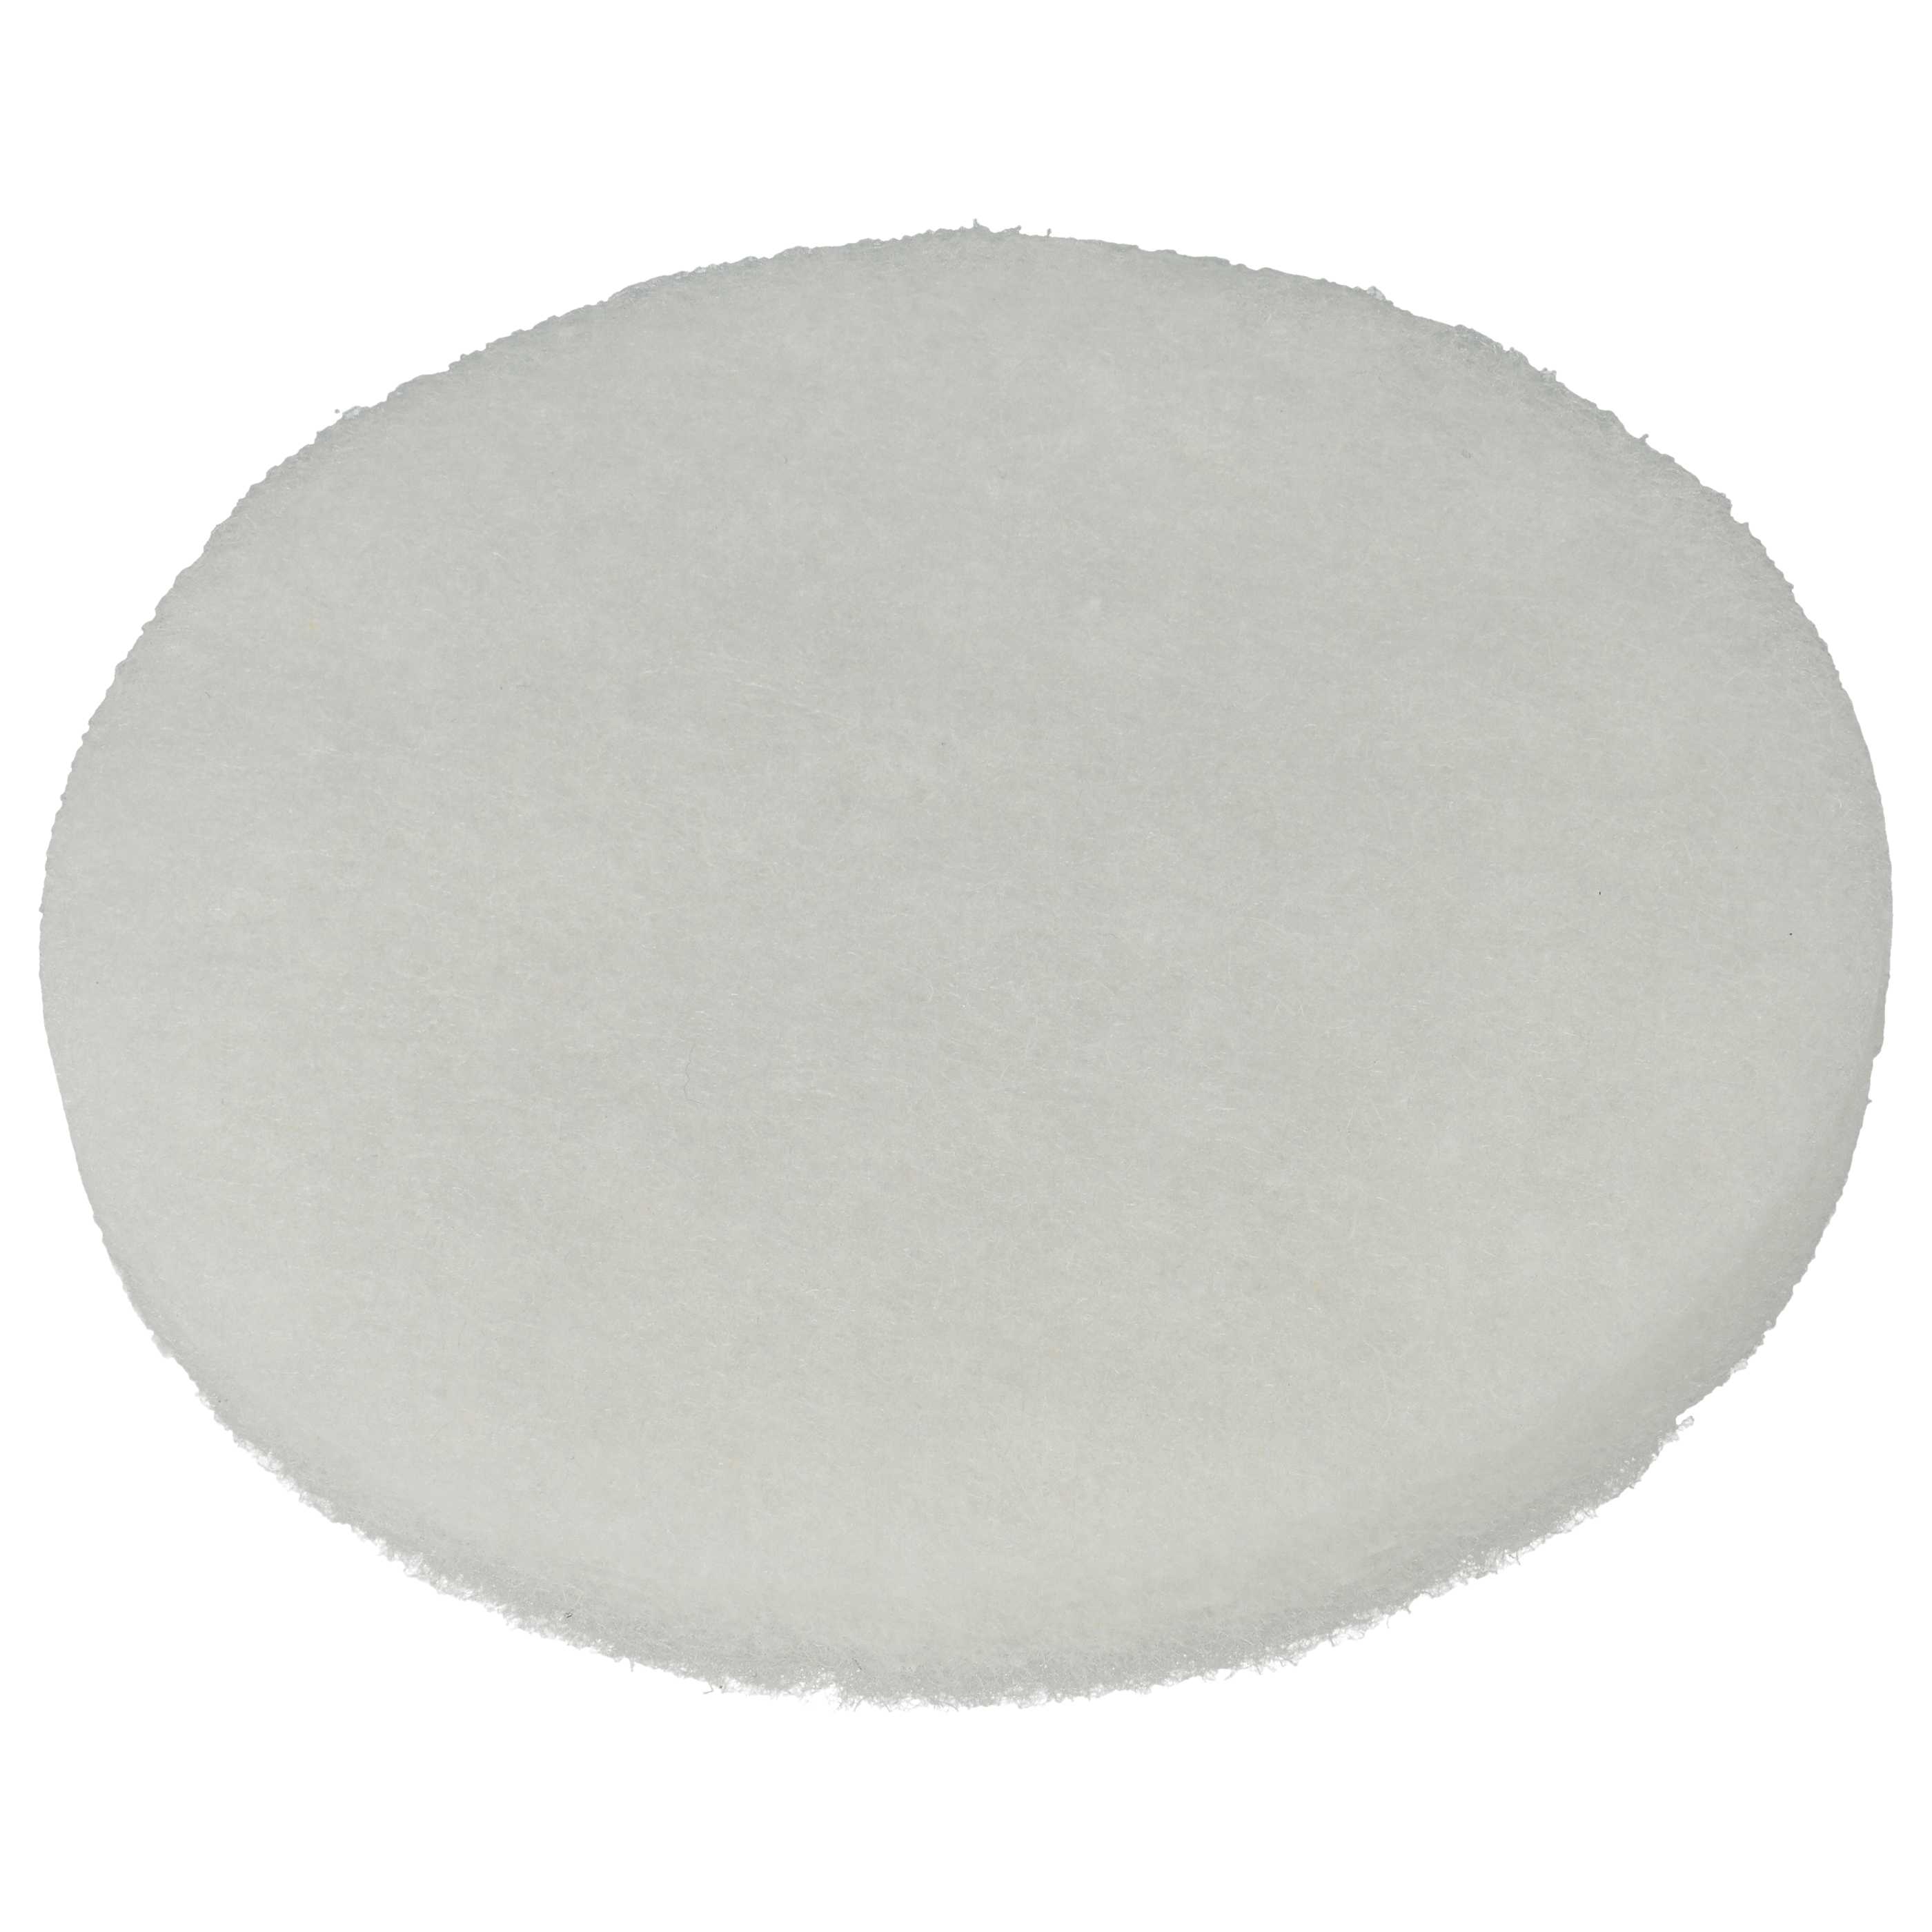 vhbw 4x Air Filter G3 Replacement for Bosch 7735600383 for Vent, Condensation Damp Control Ventilator - White